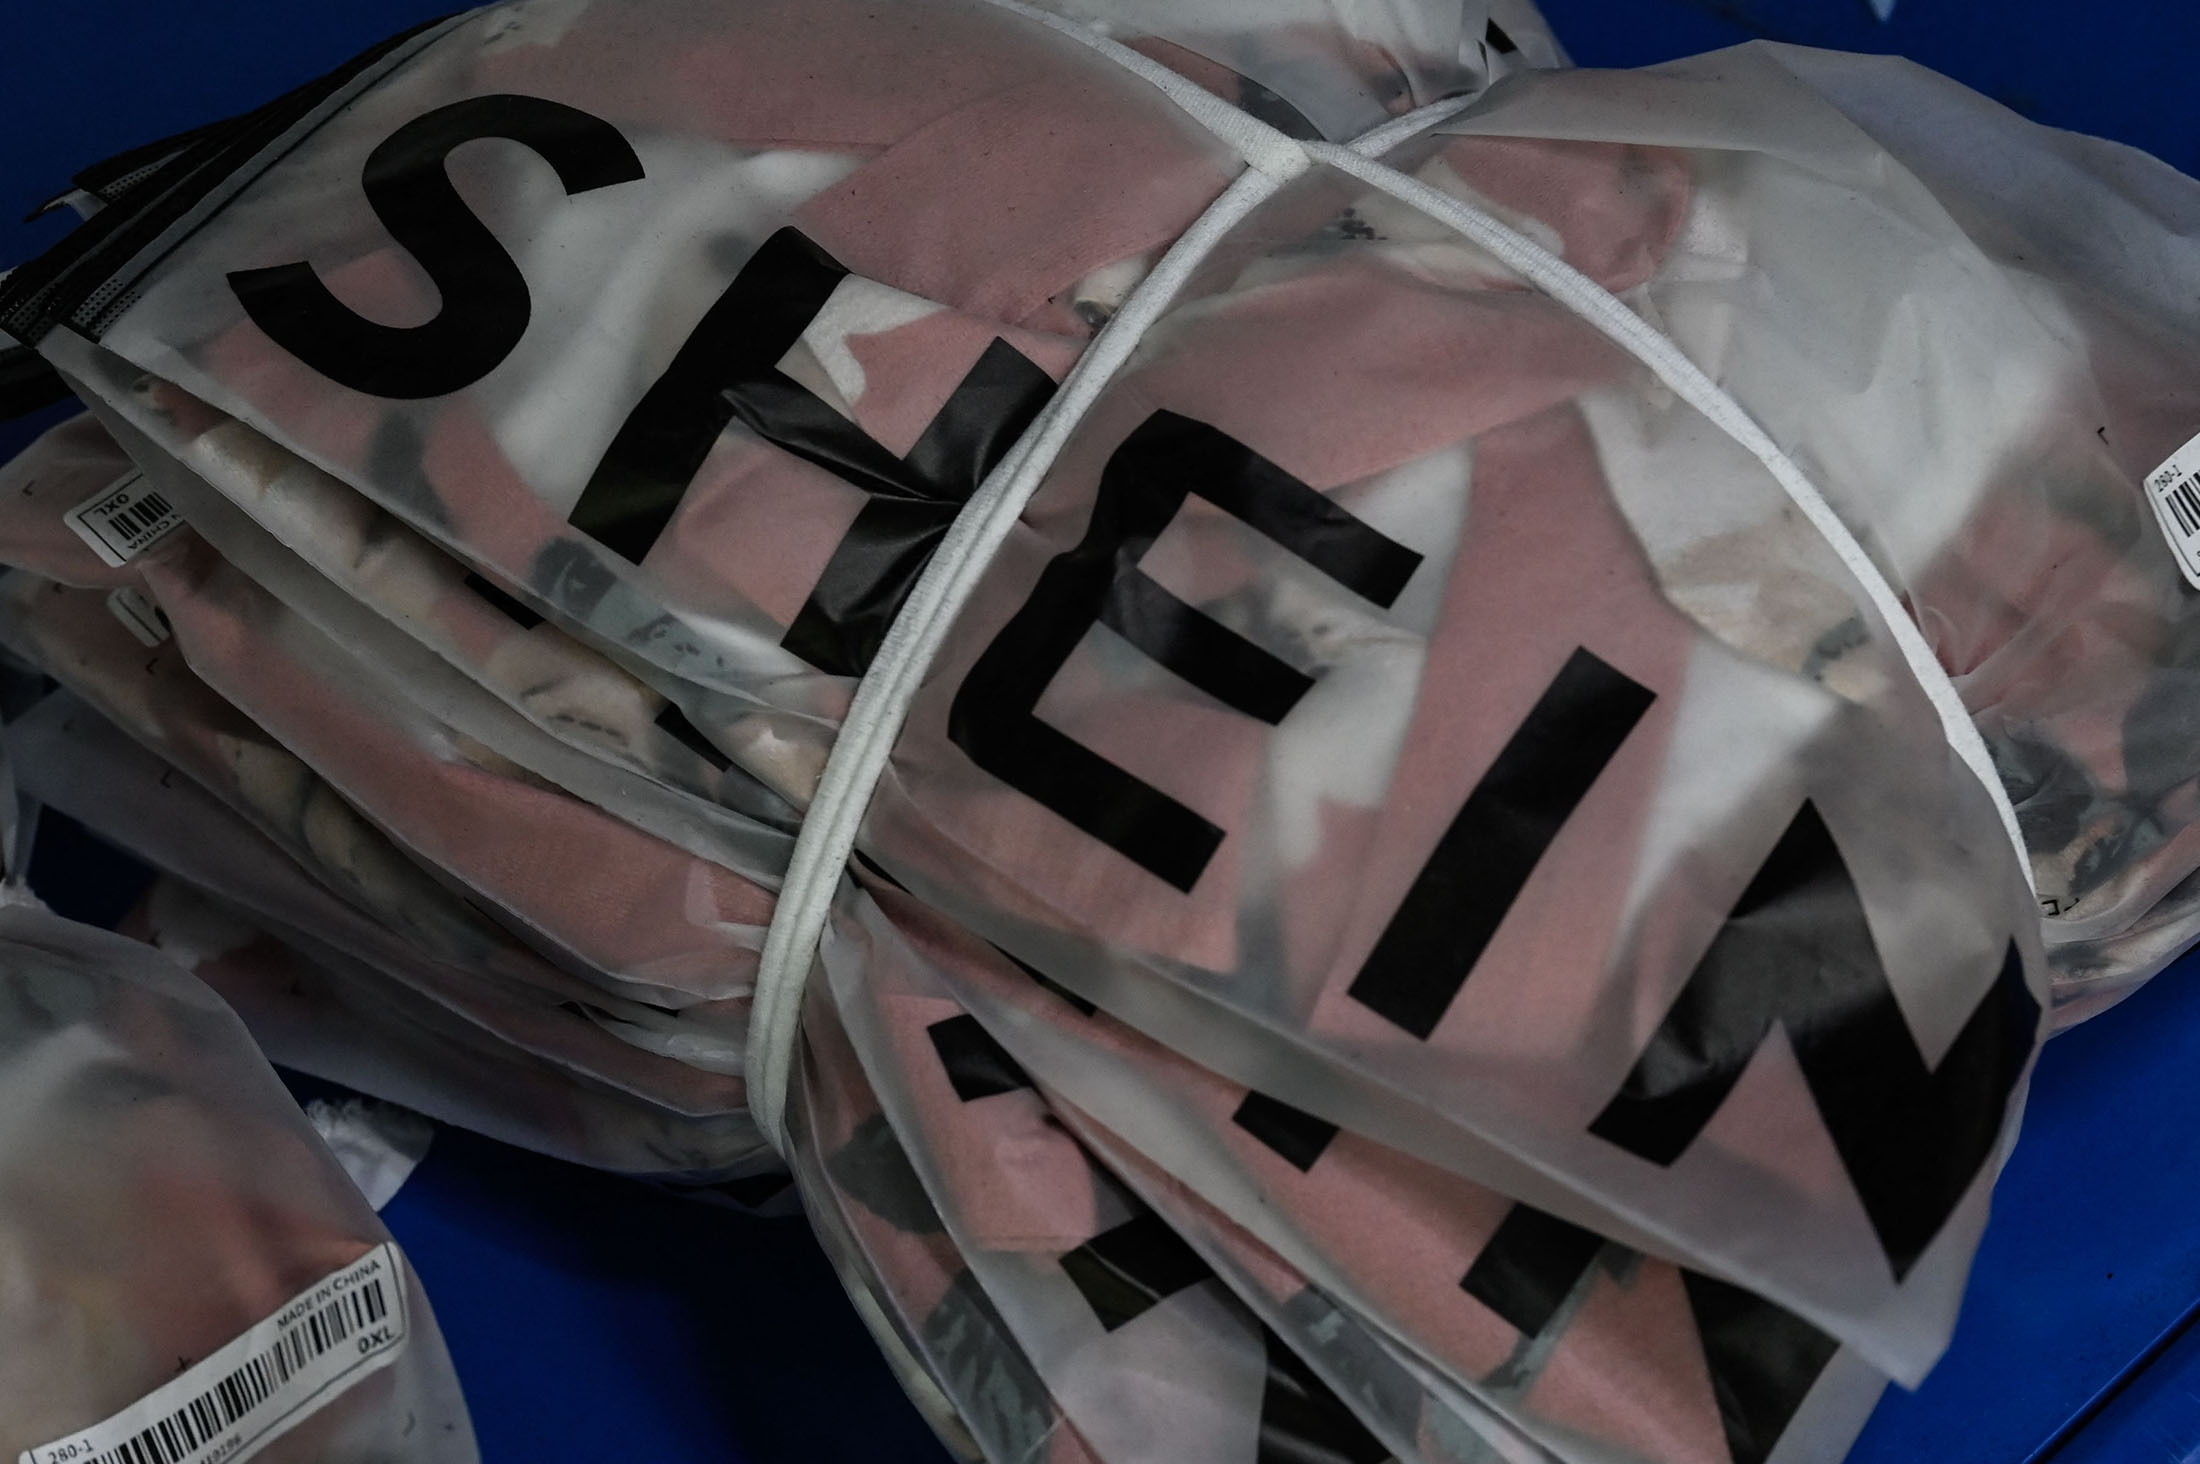 Shein Acquires Missguided in Latest Diversification Push - Bloomberg